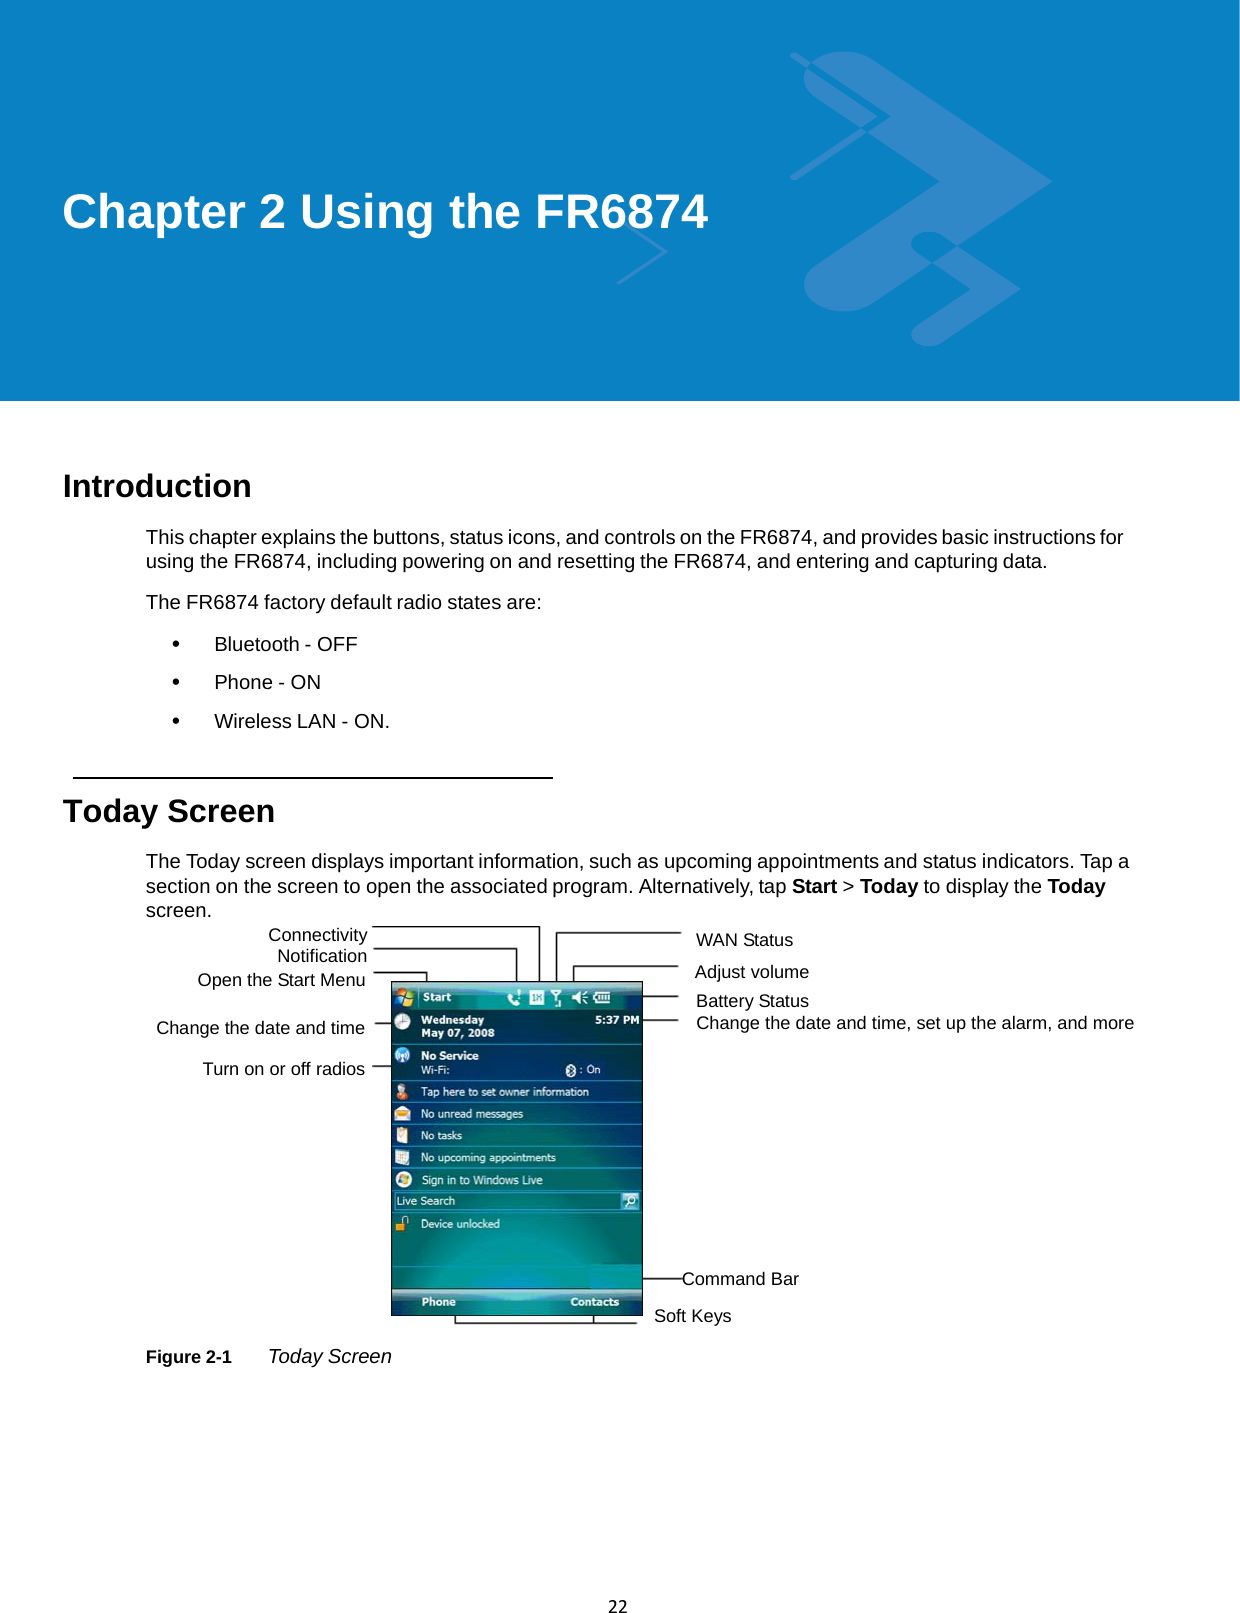  22Chapter 2 Using the FR6874          Introduction  This chapter explains the buttons, status icons, and controls on the FR6874, and provides basic instructions for using the FR6874, including powering on and resetting the FR6874, and entering and capturing data.  The FR6874 factory default radio states are:  •   Bluetooth - OFF  •   Phone - ON  •   Wireless LAN - ON.    Today Screen  The Today screen displays important information, such as upcoming appointments and status indicators. Tap a section on the screen to open the associated program. Alternatively, tap Start &gt; Today to display the Today screen. Connectivity Notification WAN Status Open the Start Menu  Adjust volume Battery Status Change the date and time Change the date and time, set up the alarm, and more  Turn on or off radios                                                                                                           Command Bar  Soft Keys  Figure 2-1      Today Screen